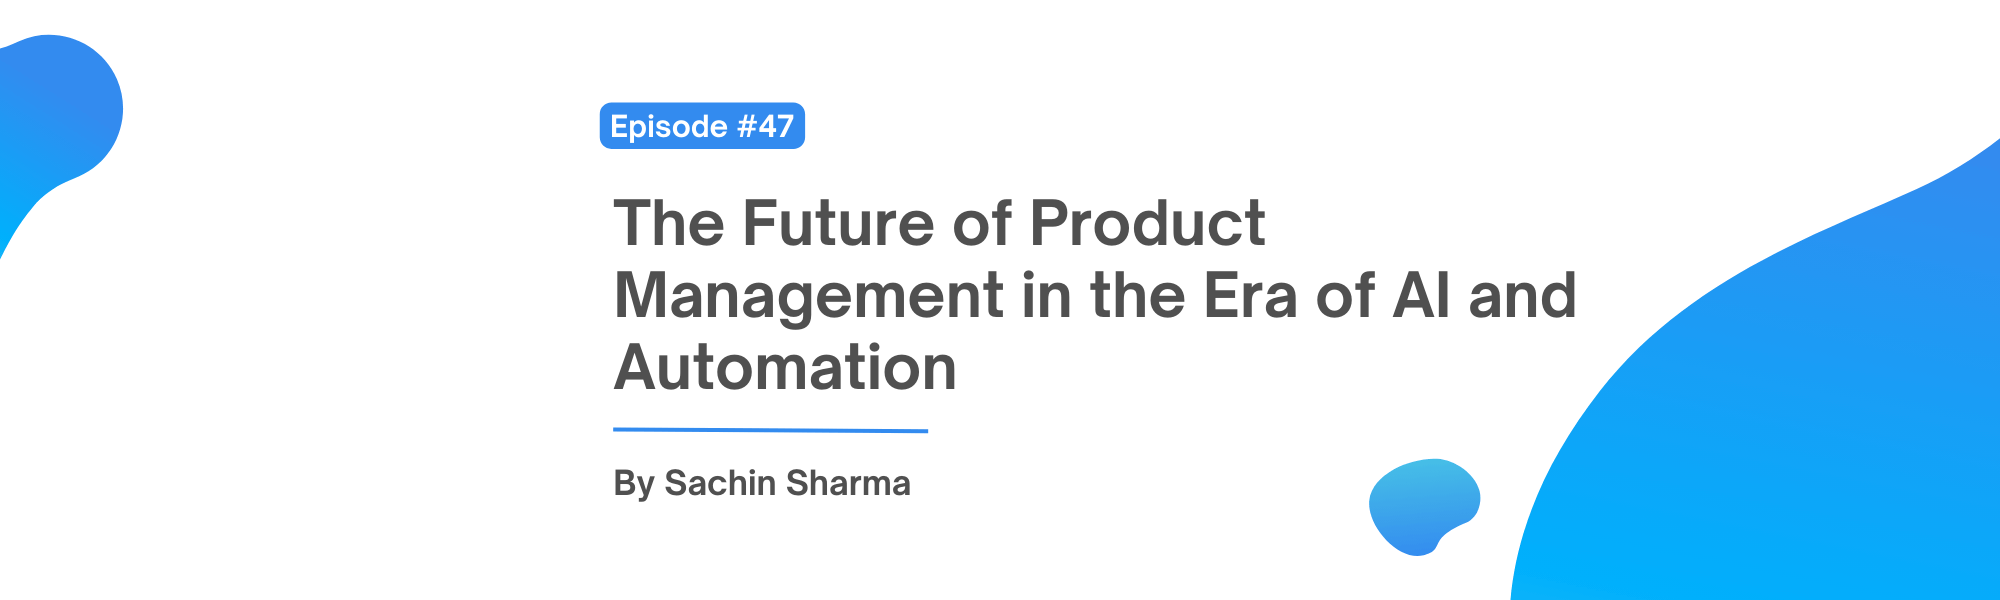 The Future of Product Management in the Era of AI and Automation